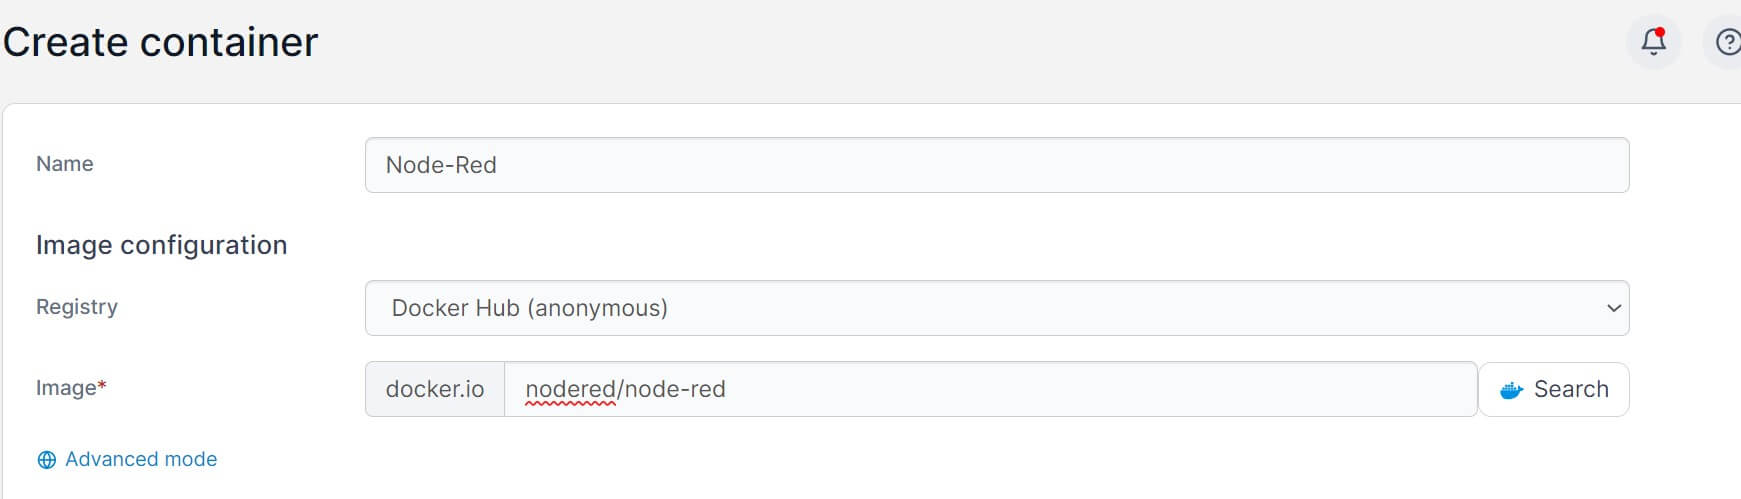 How Run Node-RED using the Portainer UI